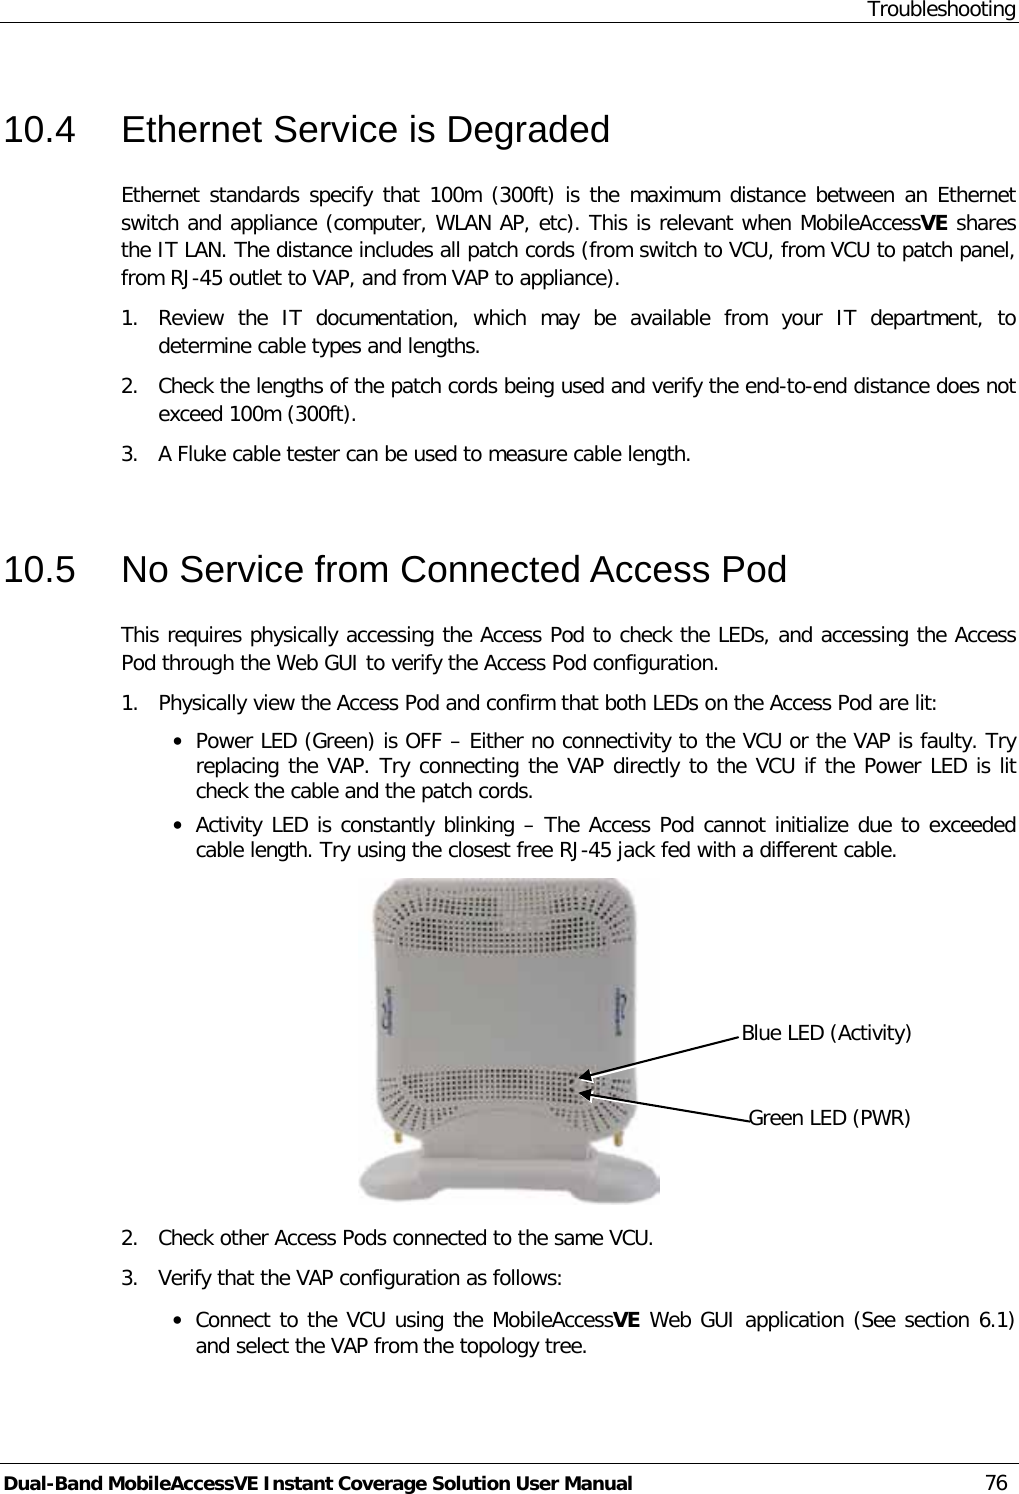 Troubleshooting Dual-Band MobileAccessVE Instant Coverage Solution User Manual 76 10.4  Ethernet Service is Degraded Ethernet standards specify that 100m (300ft) is the maximum distance between an Ethernet switch and appliance (computer, WLAN AP, etc). This is relevant when MobileAccessVE shares the IT LAN. The distance includes all patch cords (from switch to VCU, from VCU to patch panel, from RJ-45 outlet to VAP, and from VAP to appliance).  1.  Review the IT documentation,  which  may be available from your IT department,  to determine cable types and lengths. 2.  Check the lengths of the patch cords being used and verify the end-to-end distance does not exceed 100m (300ft). 3.  A Fluke cable tester can be used to measure cable length.  10.5  No Service from Connected Access Pod This requires physically accessing the Access Pod to check the LEDs, and accessing the Access Pod through the Web GUI to verify the Access Pod configuration.  1.  Physically view the Access Pod and confirm that both LEDs on the Access Pod are lit: · Power LED (Green) is OFF – Either no connectivity to the VCU or the VAP is faulty. Try replacing the VAP. Try connecting the VAP directly to the VCU if the Power LED is lit check the cable and the patch cords. · Activity LED is constantly blinking – The Access Pod cannot initialize due to exceeded cable length. Try using the closest free RJ-45 jack fed with a different cable.  2.  Check other Access Pods connected to the same VCU. 3.  Verify that the VAP configuration as follows: · Connect to the VCU using the MobileAccessVE Web GUI application (See section  6.1) and select the VAP from the topology tree. Blue LED (Activity) Green LED (PWR) 